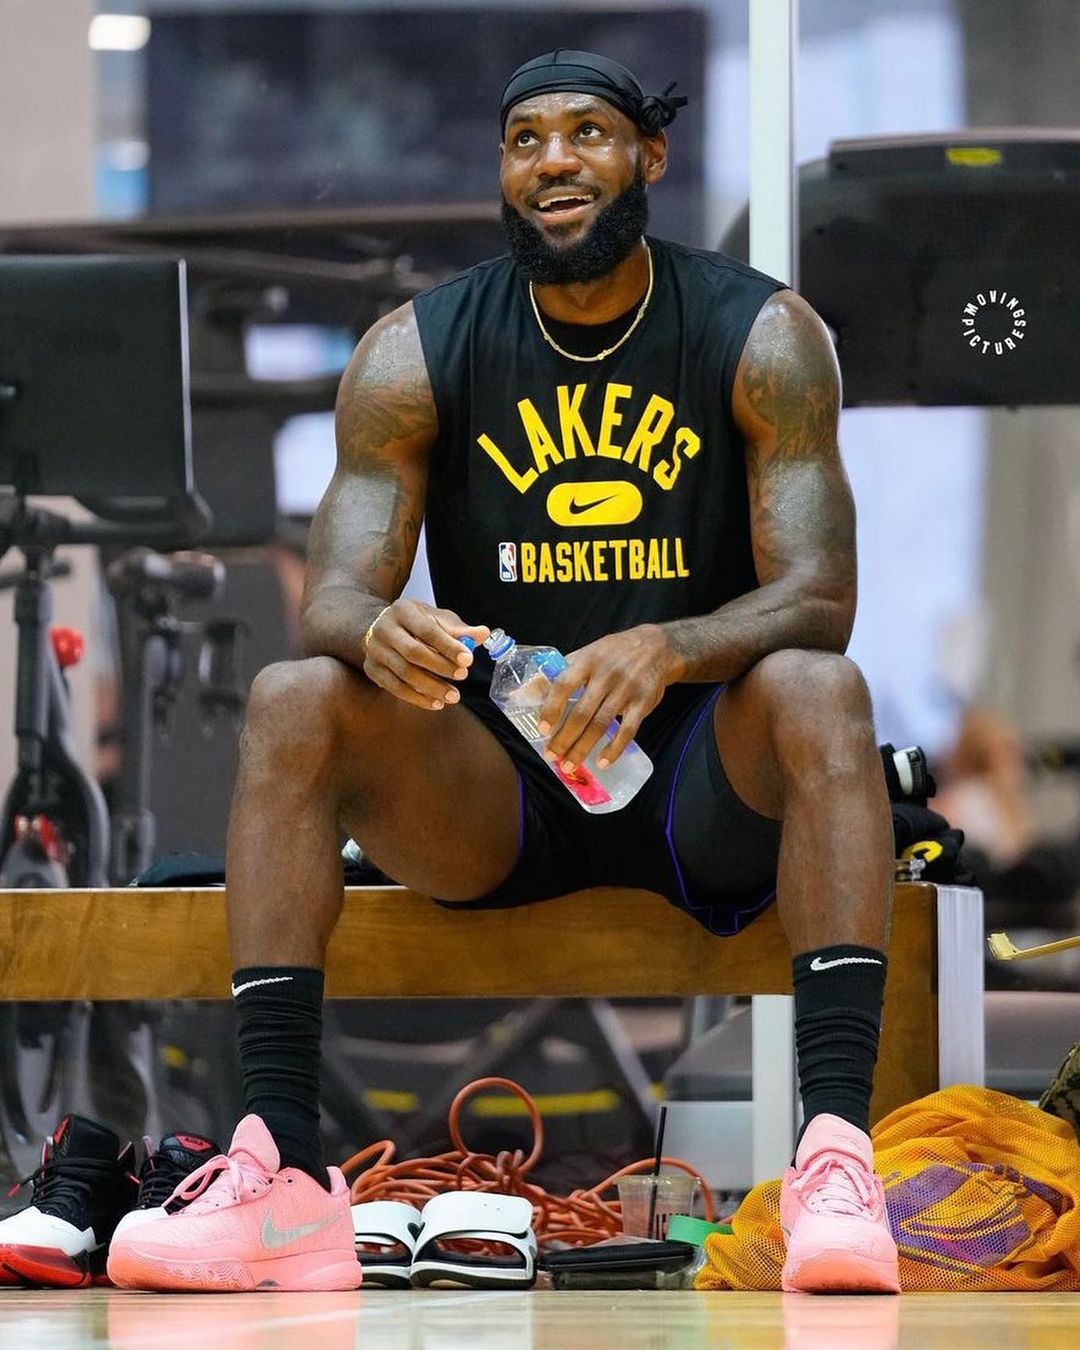 LeBron James Wears Unreleased Nike Shoes at Drew League - Sports